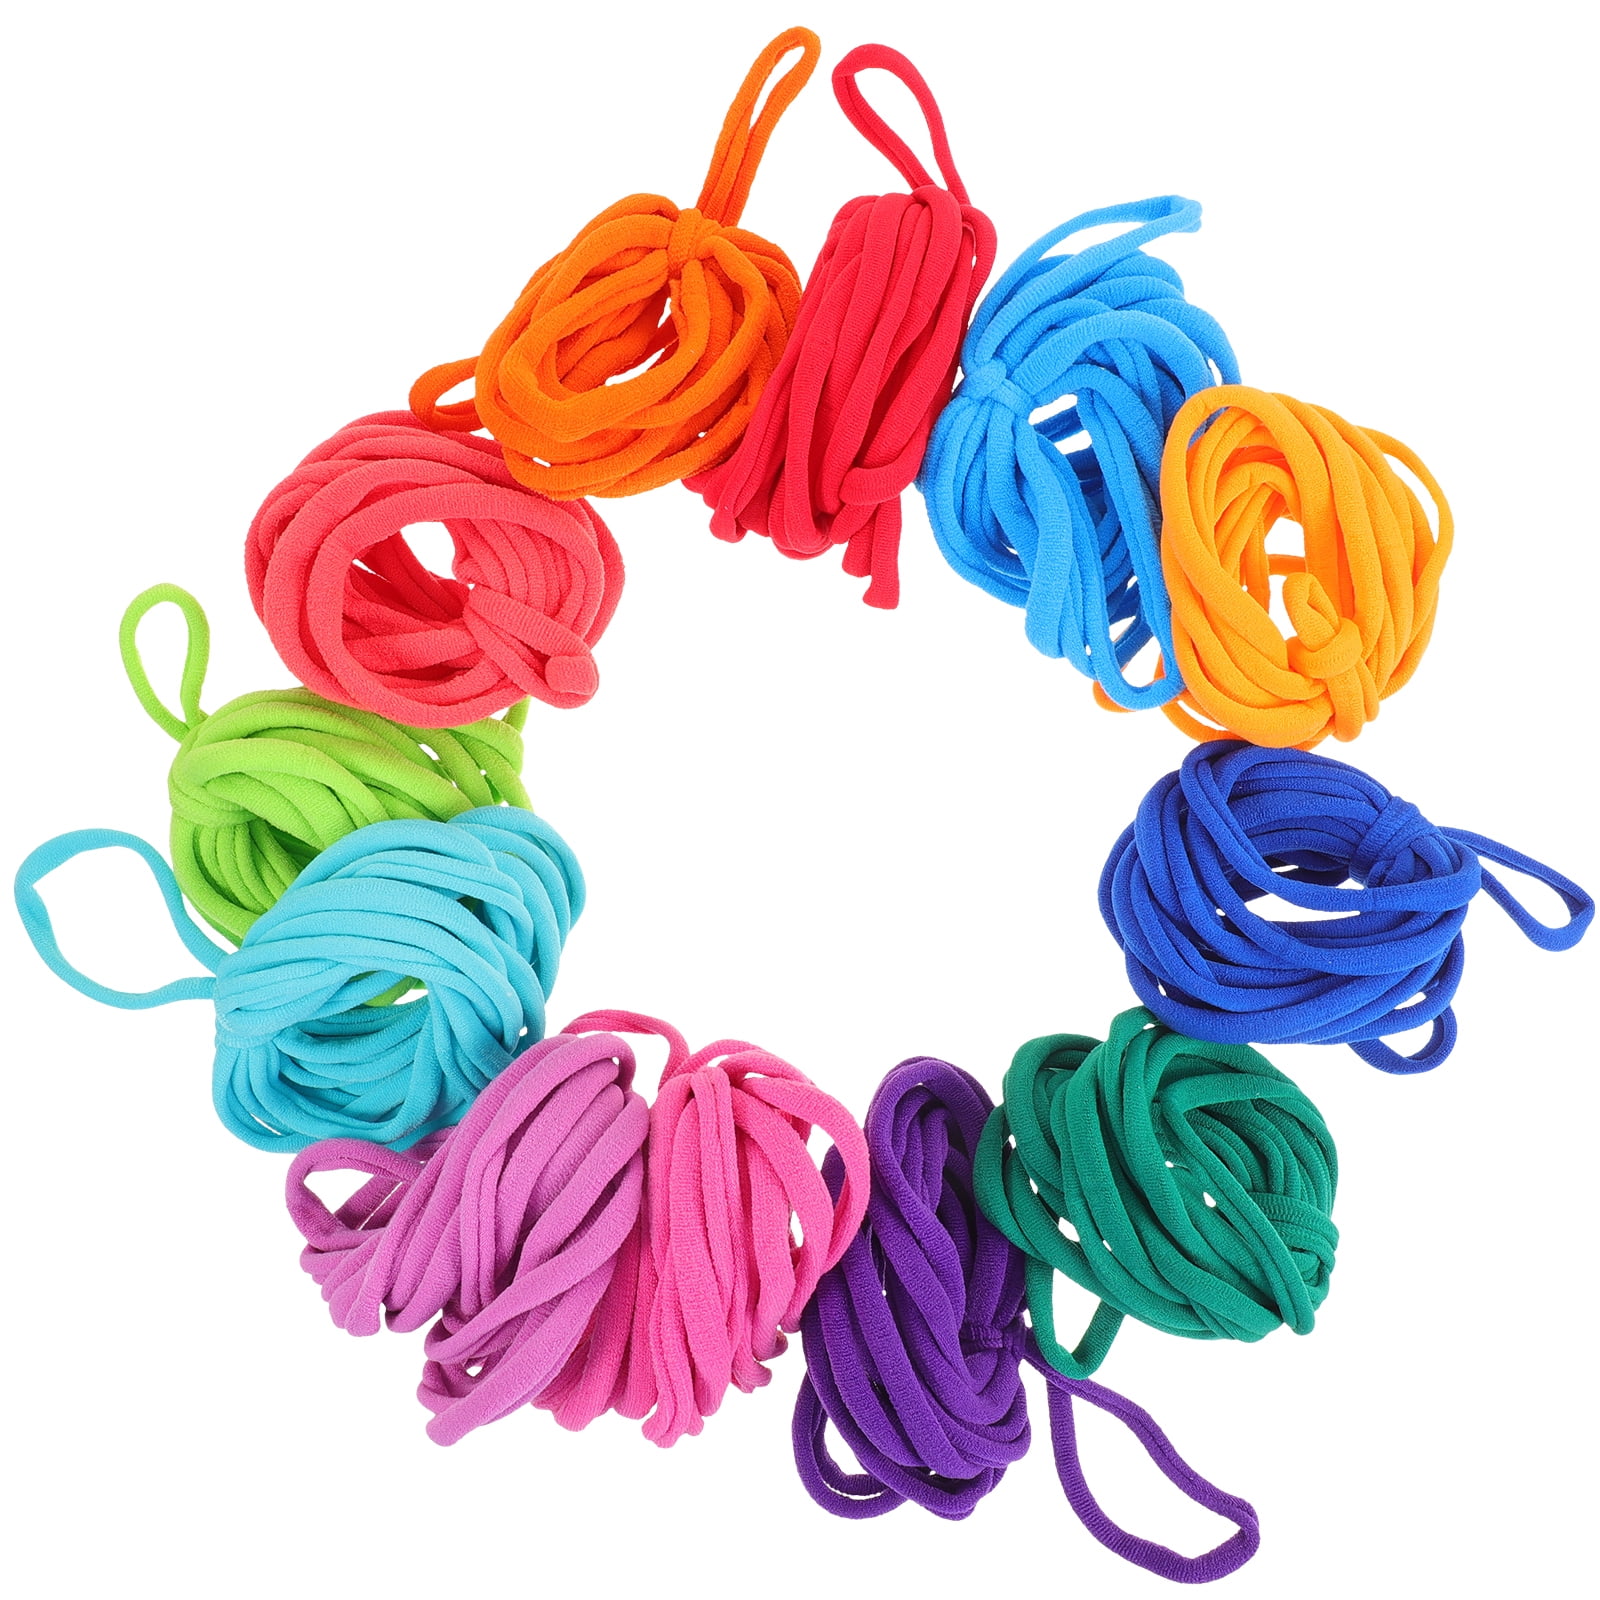 Abaodam 960 pcs Elastic Braided Rope Looms for Kids for Pot Holders Craft  Refills for potholders potholder Loom kit for Kids speedweve DIY Arts and